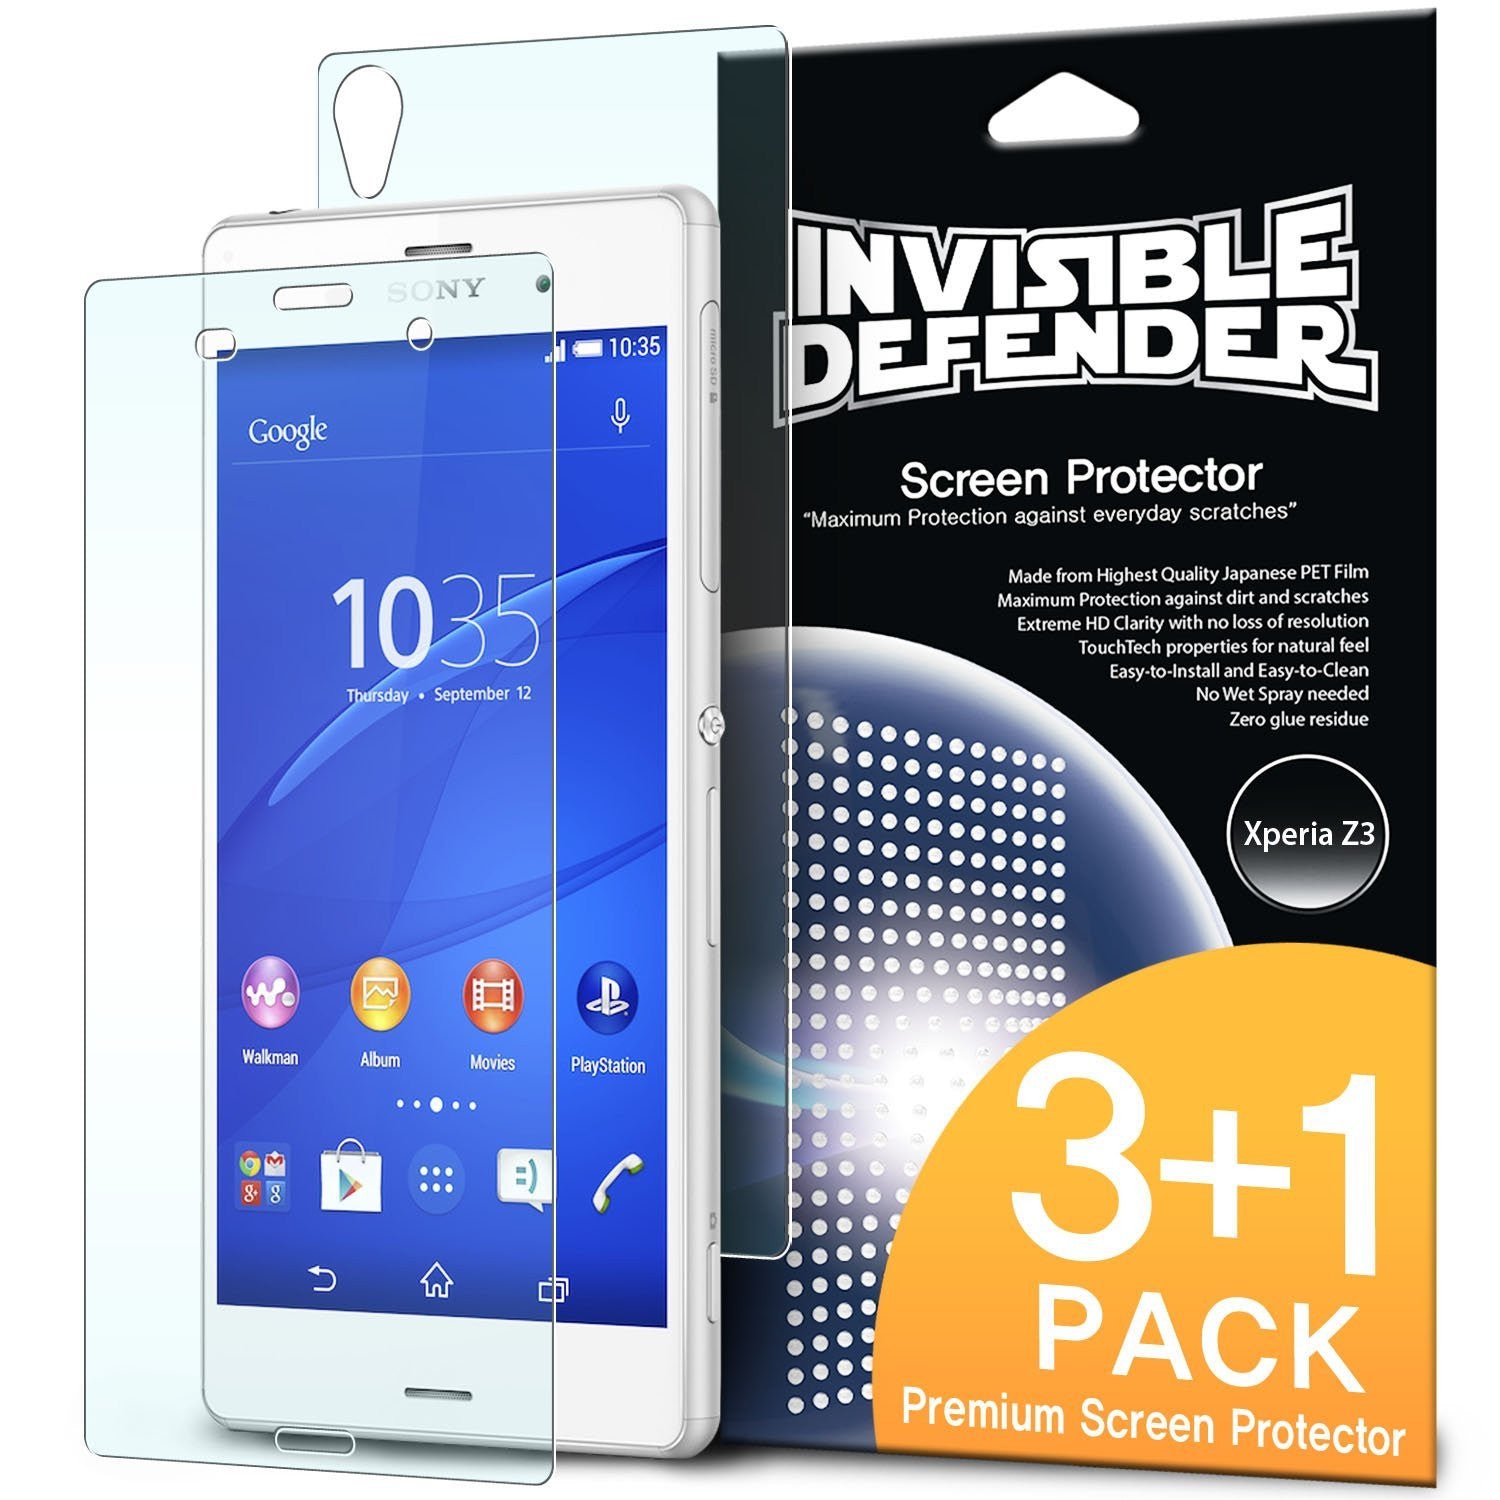 xperia z3, ringke invisible defender 3+1 pack screen protector